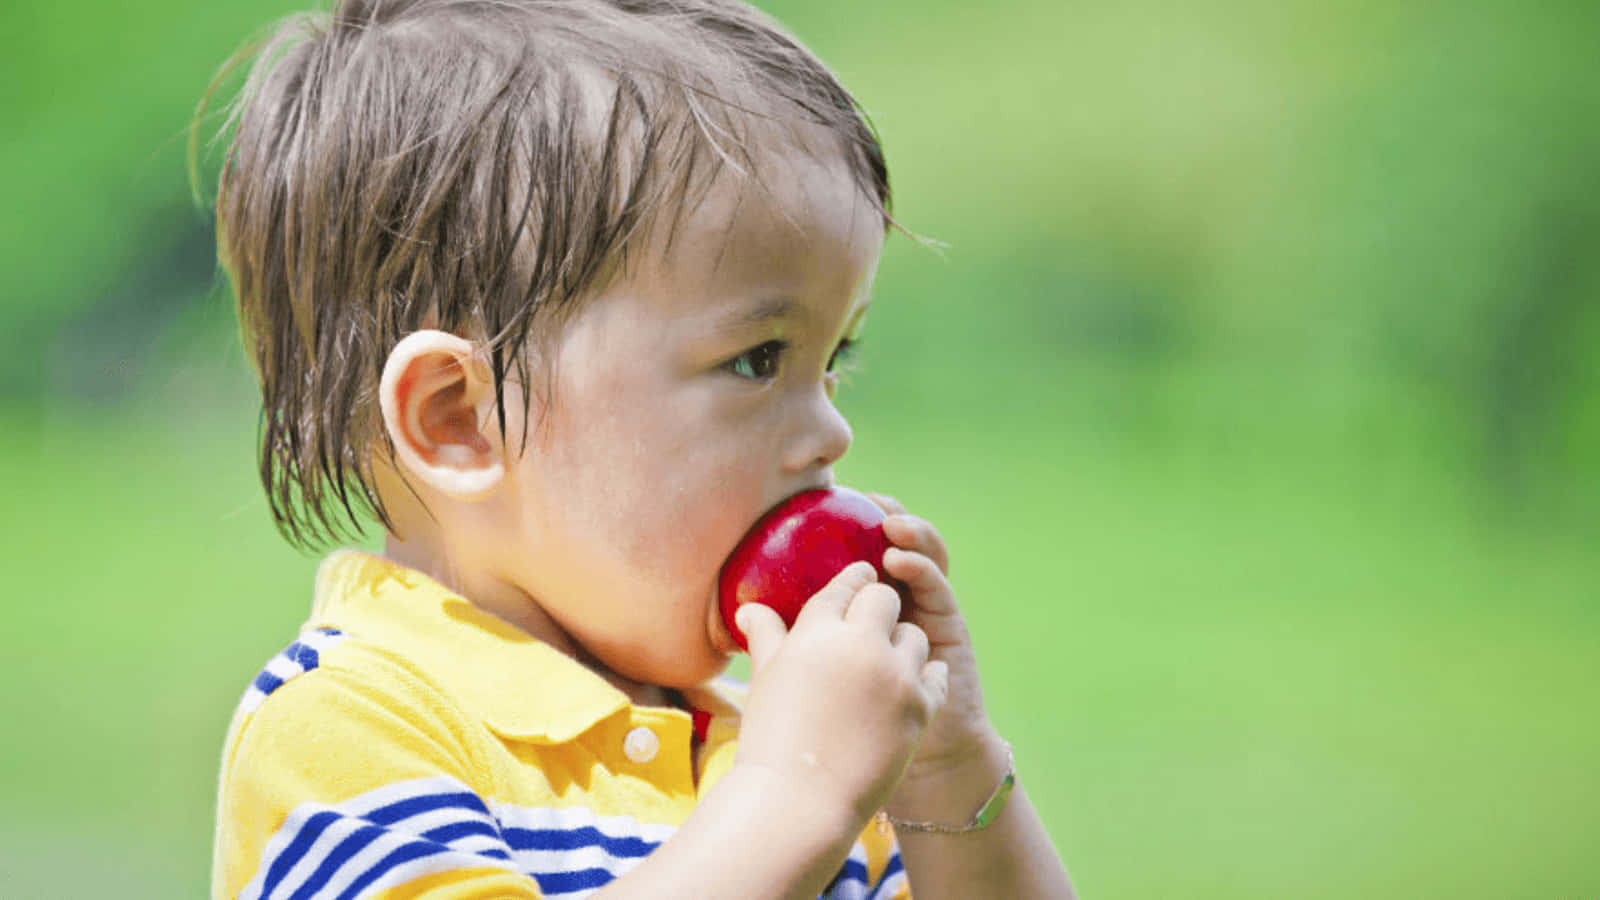 A Young Boy Eating An Apple